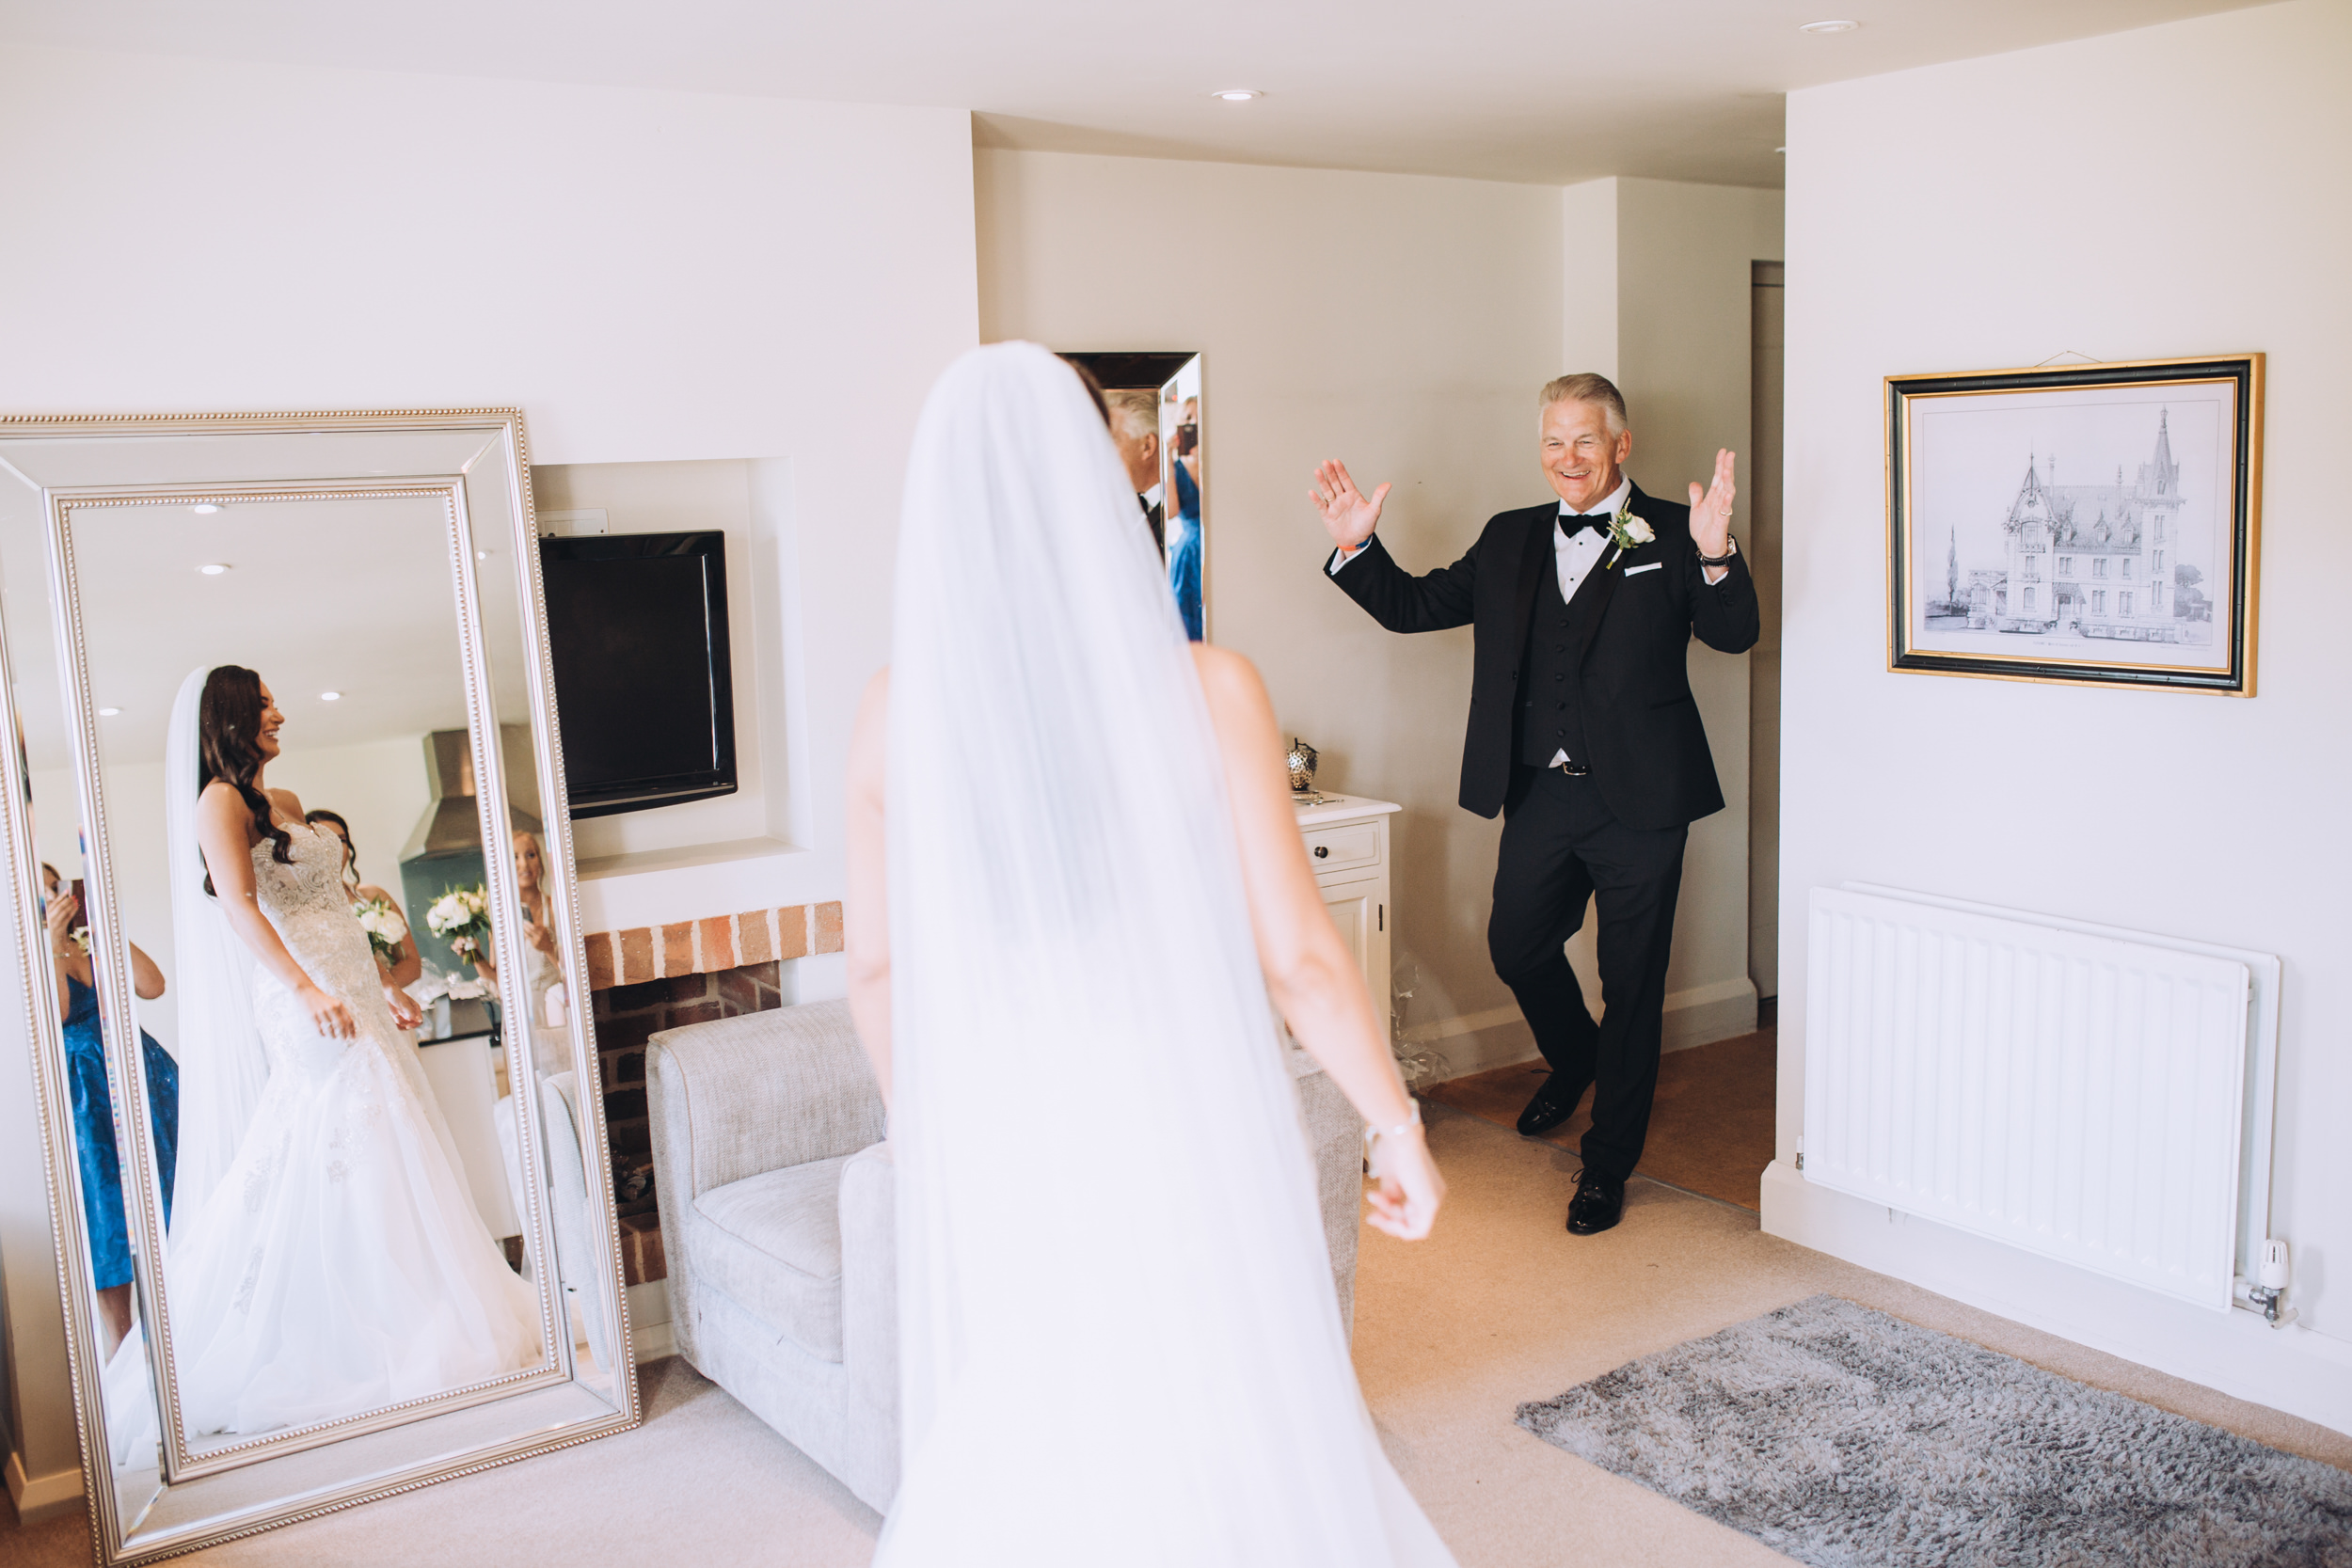 priory cottages wetherby wedding photographers18.jpg